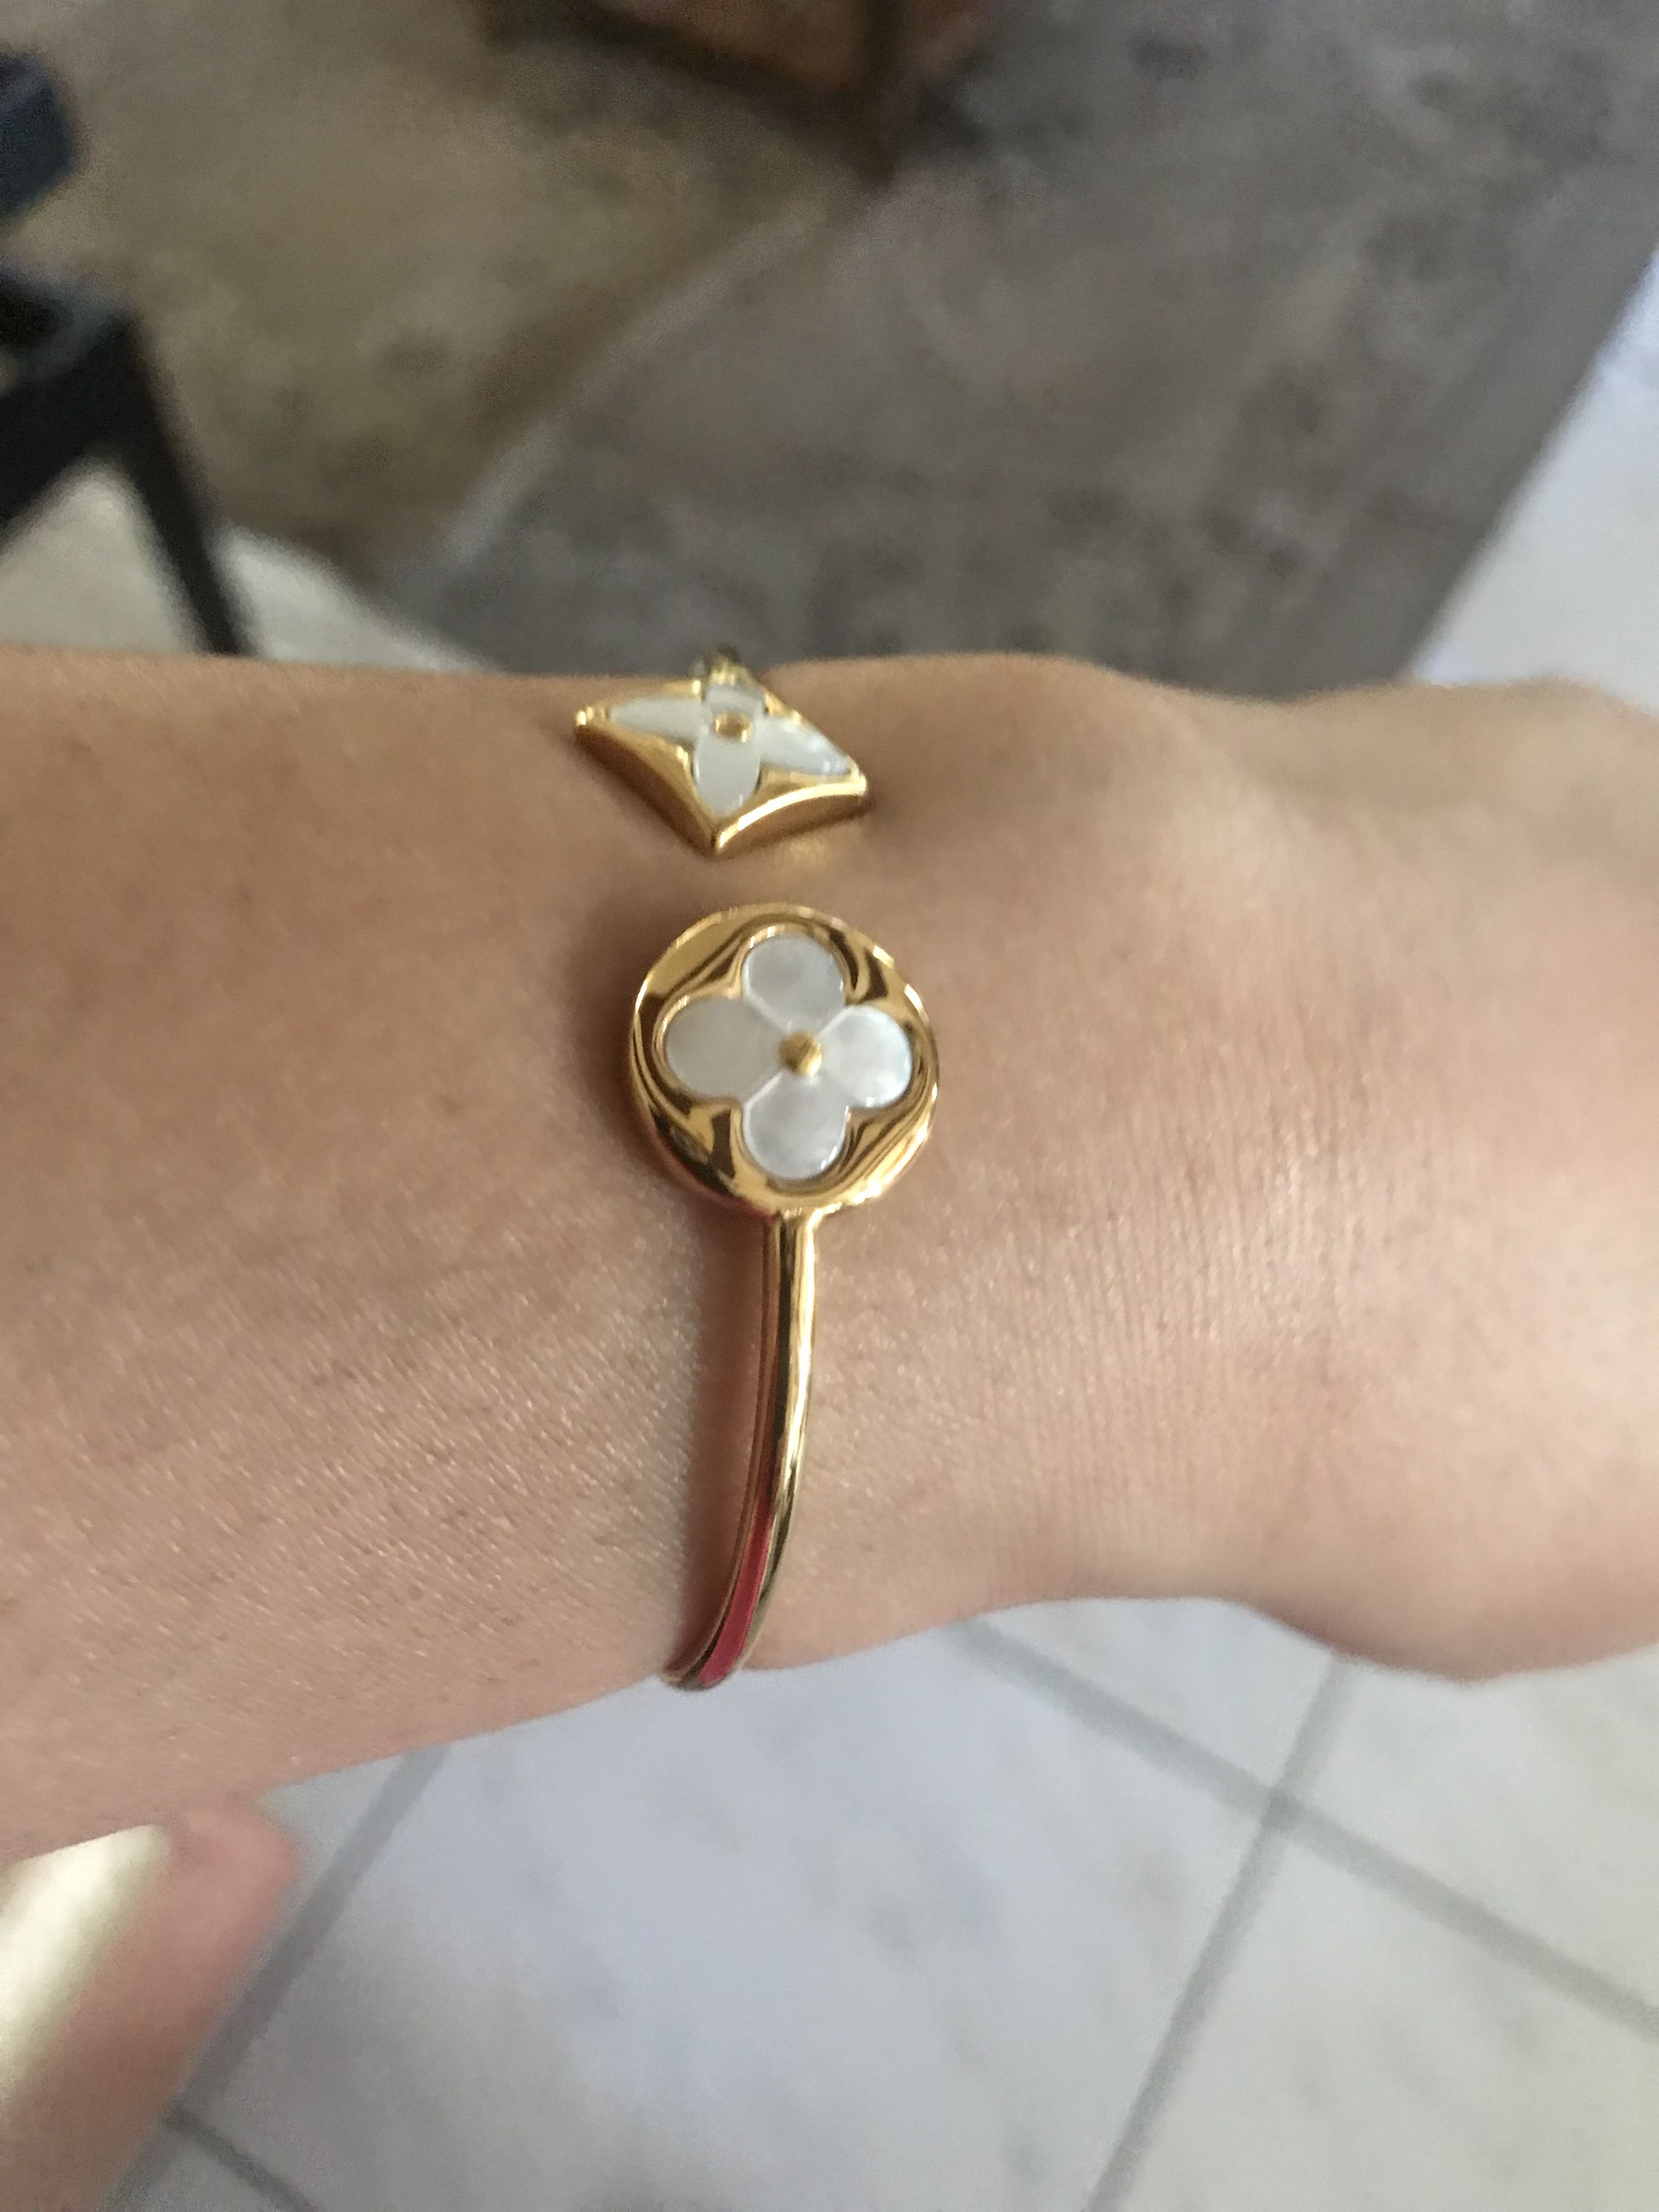 Louis Vuitton mother of pearl blossom bracelet 18k plated preorder, Women's  Fashion, Jewelry & Organizers, Bracelets on Carousell